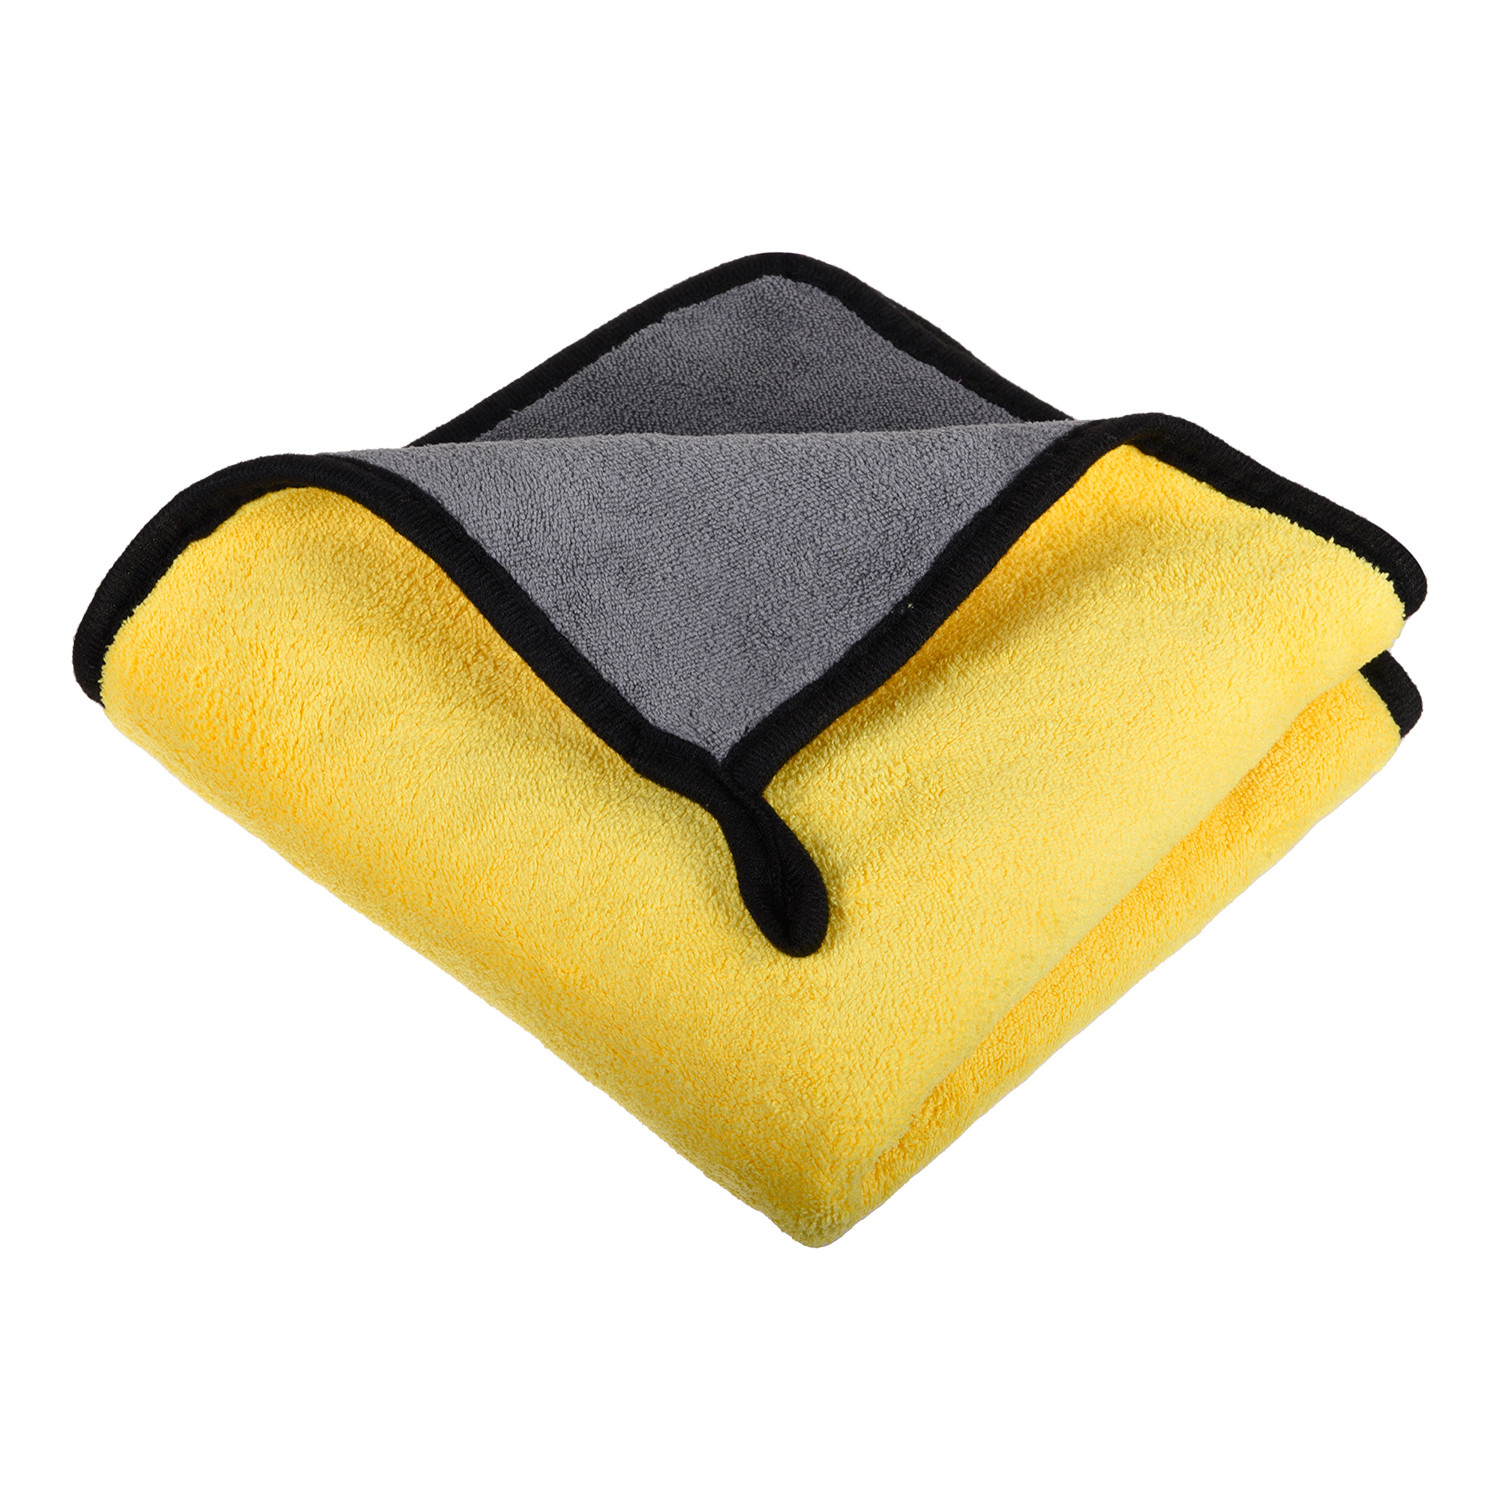 Kuber Industries Cleaning Towel|Microfiber Reusable Cloths|Highly Absorbent Washable Towel for Kitchen With Hanging Loop|Car|Window|40x40 Cm|Pack of 2 (Multi)